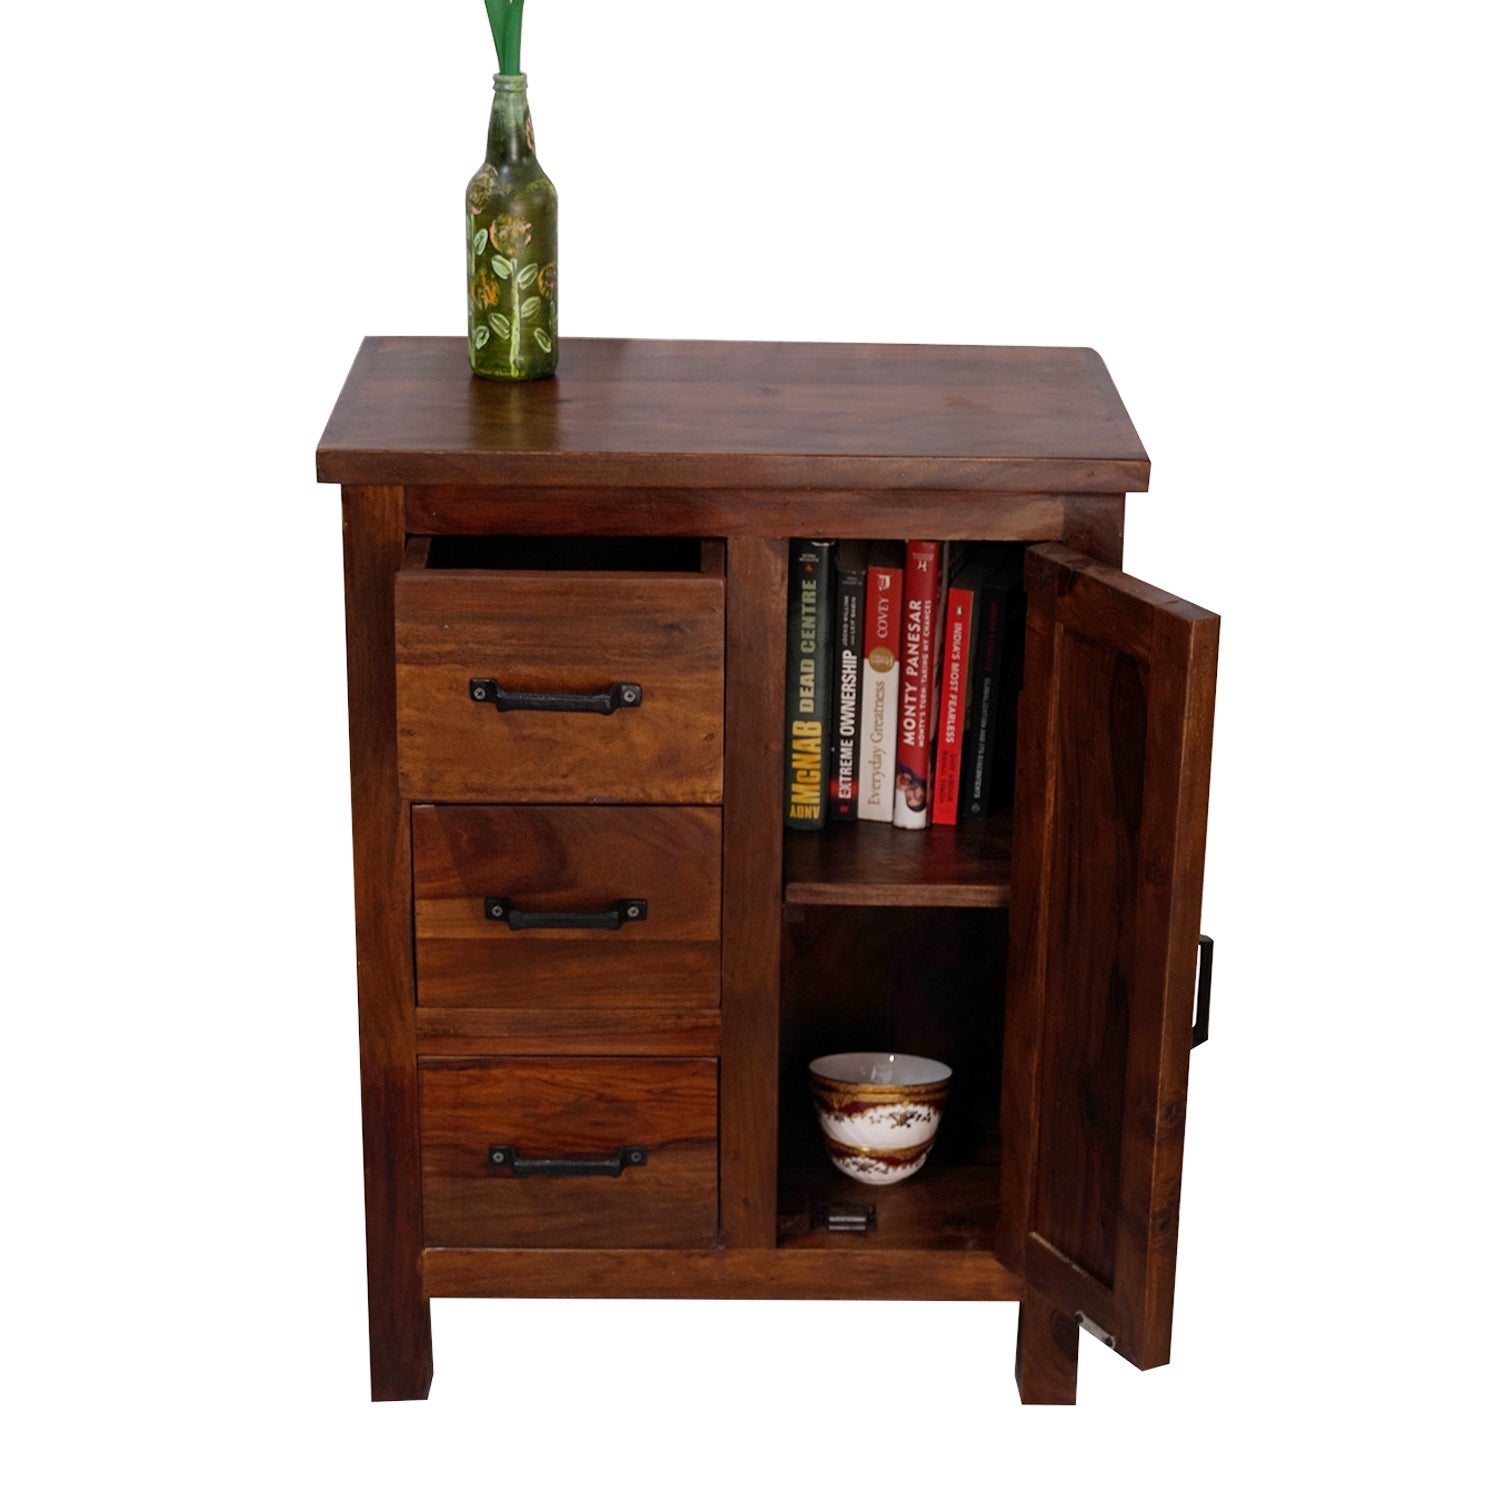 Wooden Storage Cabinet with Removable Shelf and 3 Drawers - Stylla London